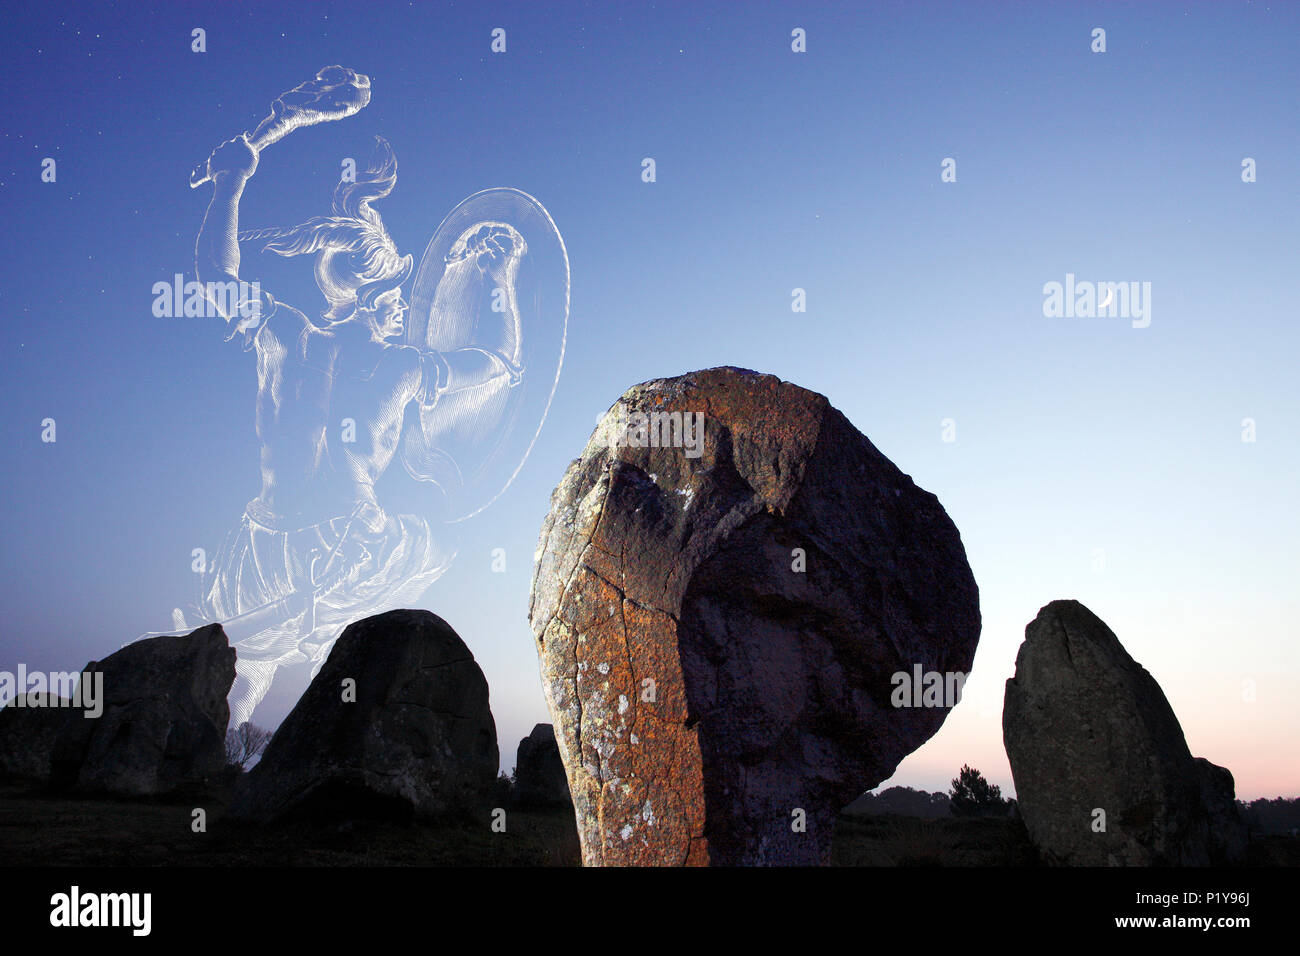 Morbihan, Carnac, menhirs, alignment of Kermario in the twilight. The Orion hunter seems to want to capture the crescent of the moon. Stock Photo